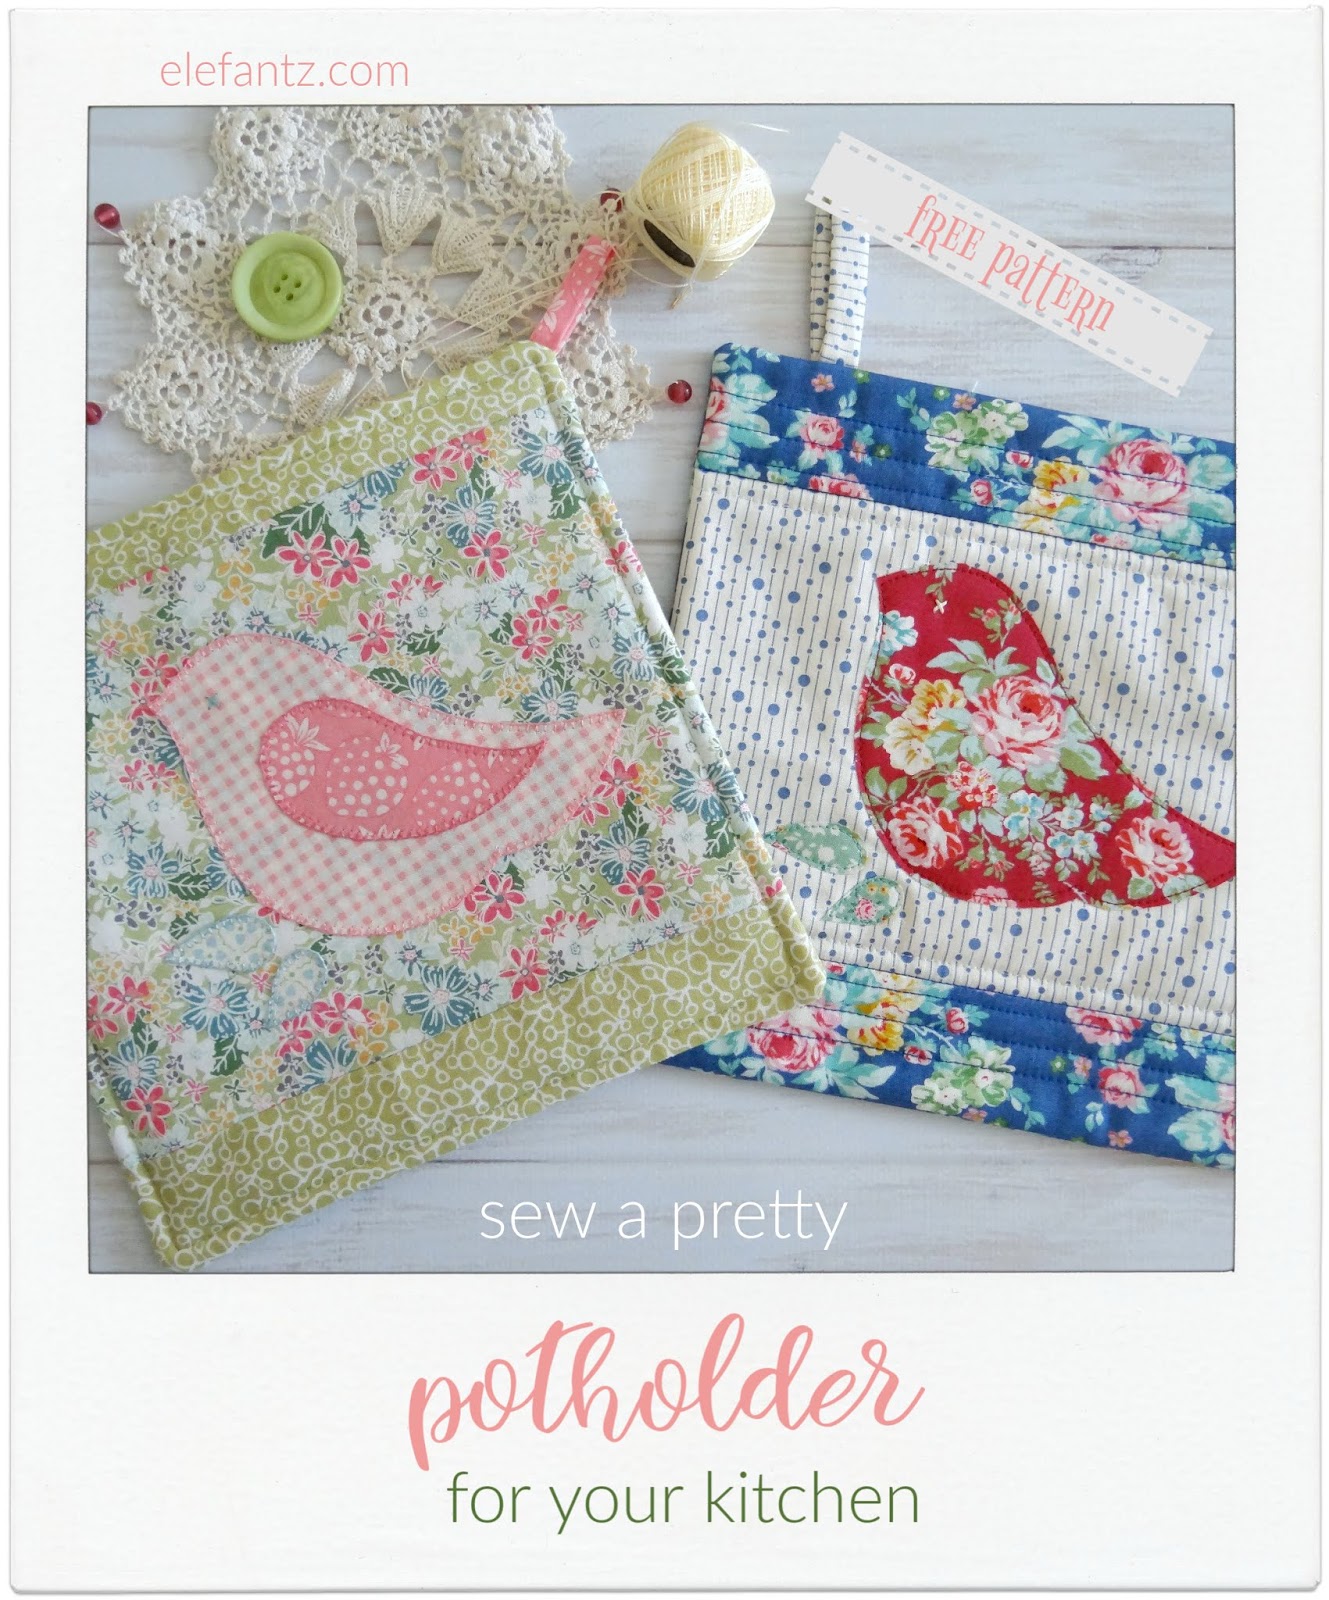 How to Sew Last Minute Potholders (from UFO quilt blocks!)